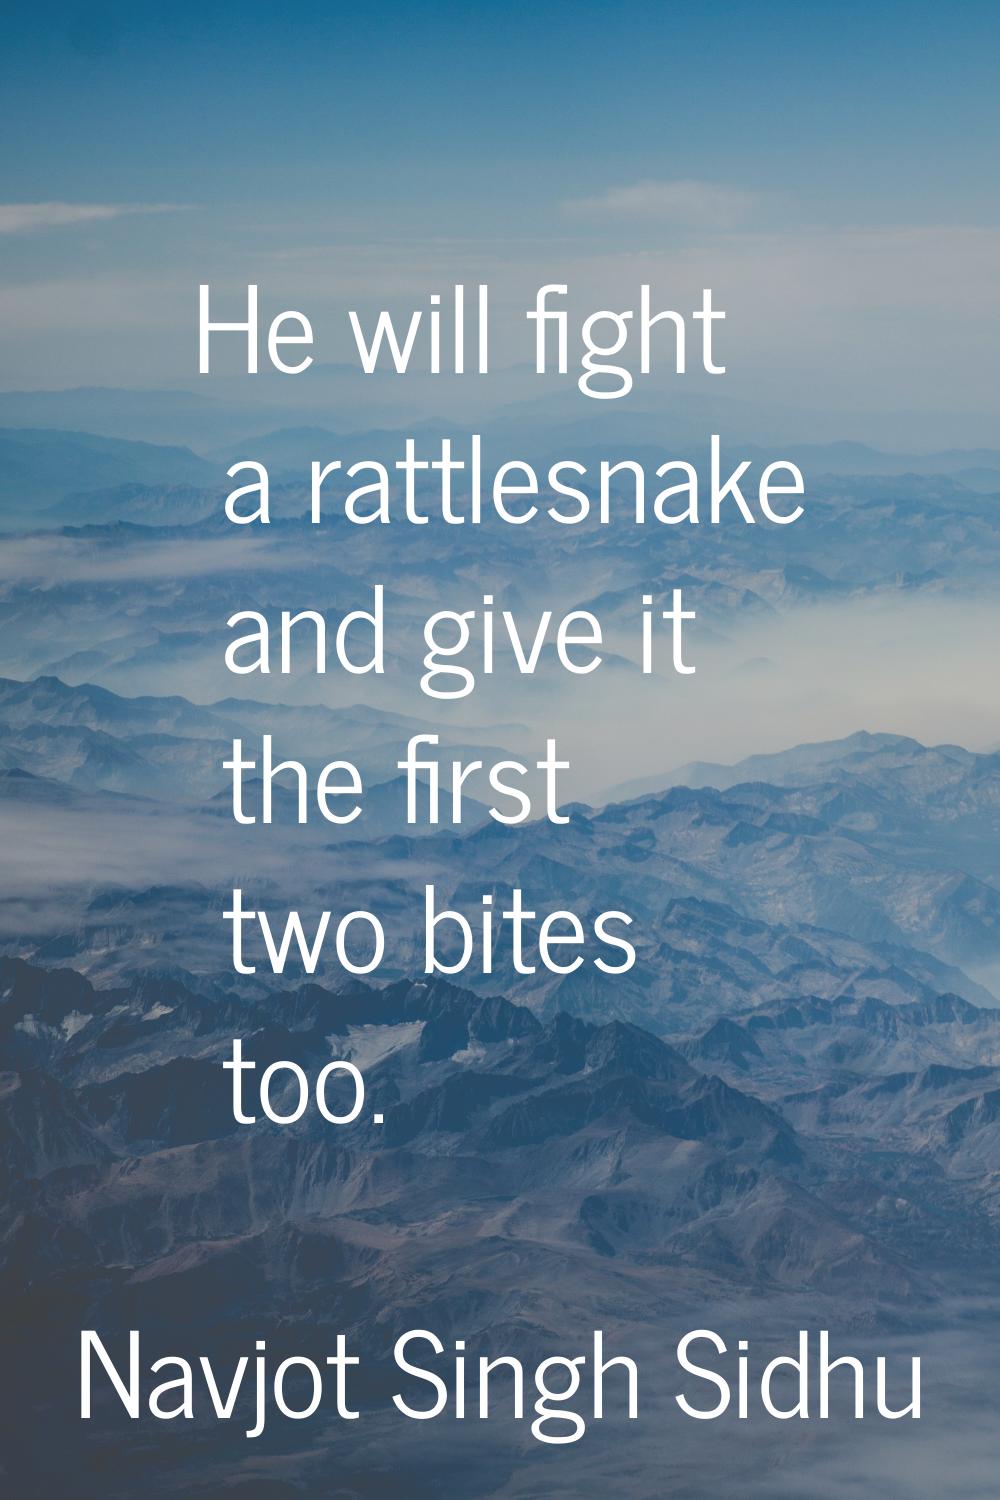 He will fight a rattlesnake and give it the first two bites too.